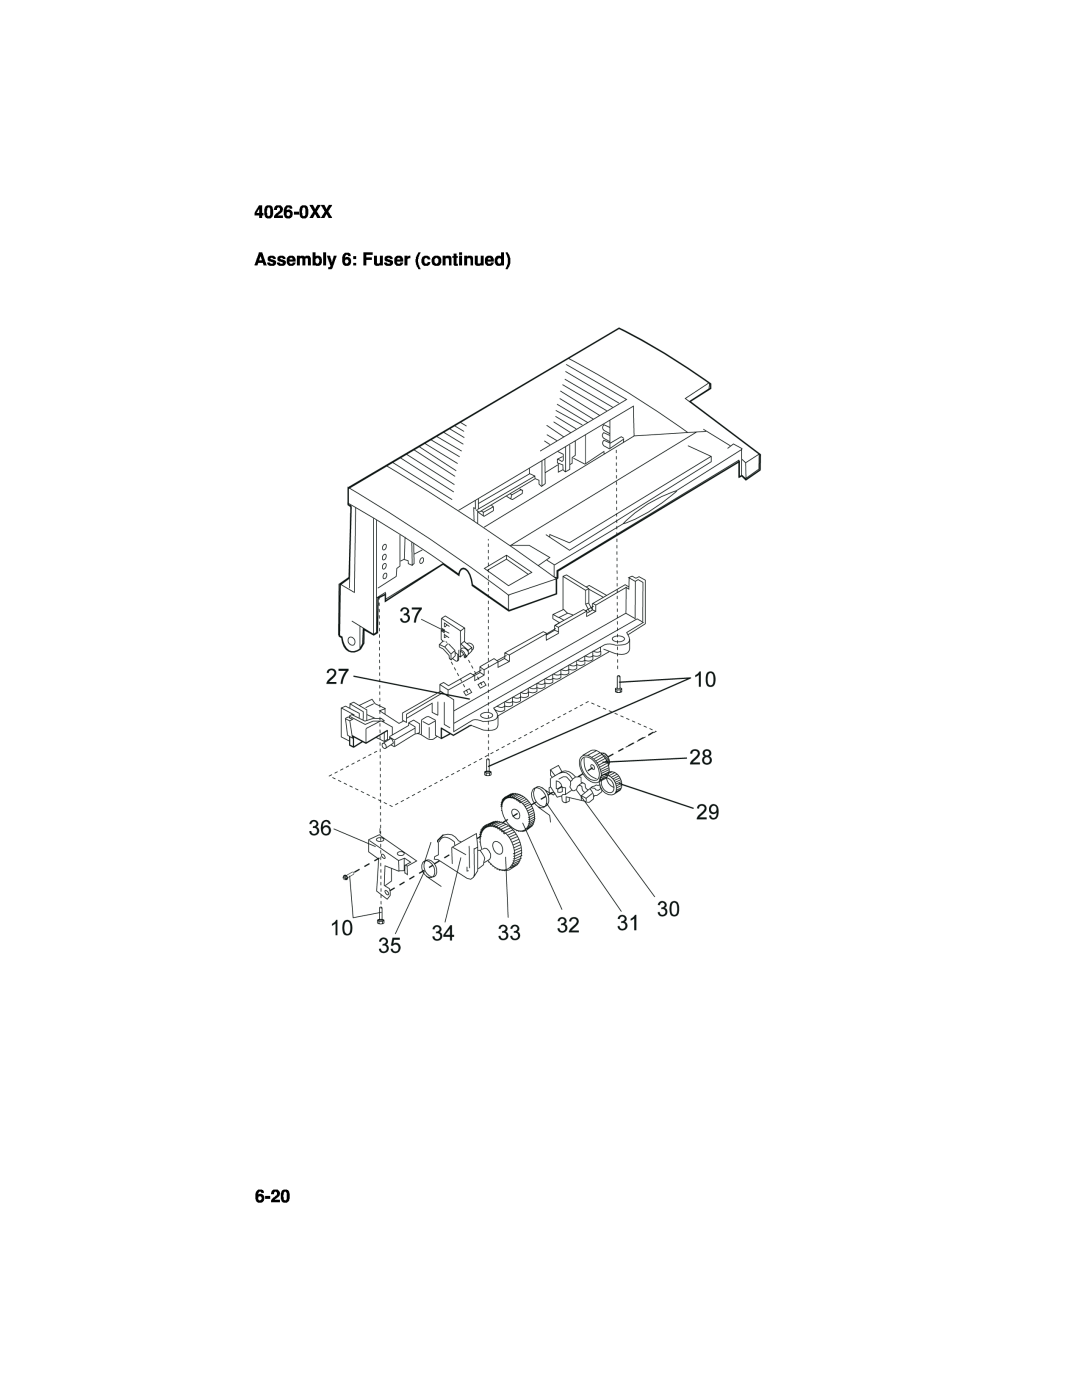 Lexmark OptraTM manual 4026-0XX Assembly 6: Fuser continued, 6-20 